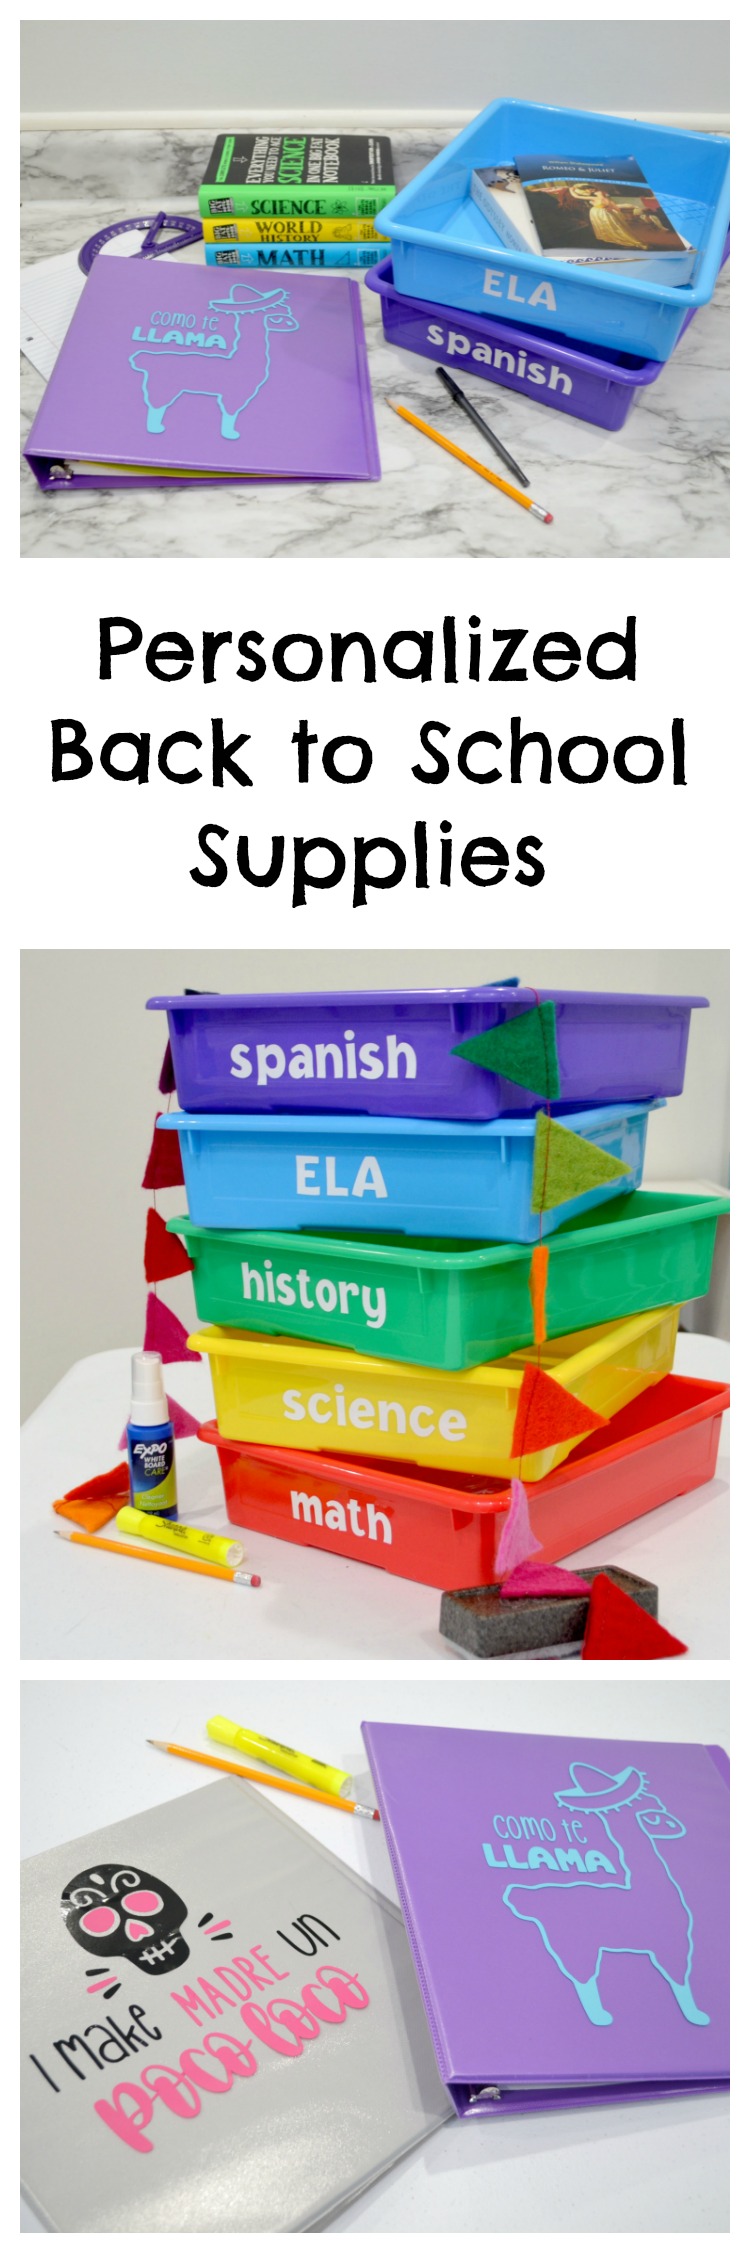 Personalized Back to School Supplies